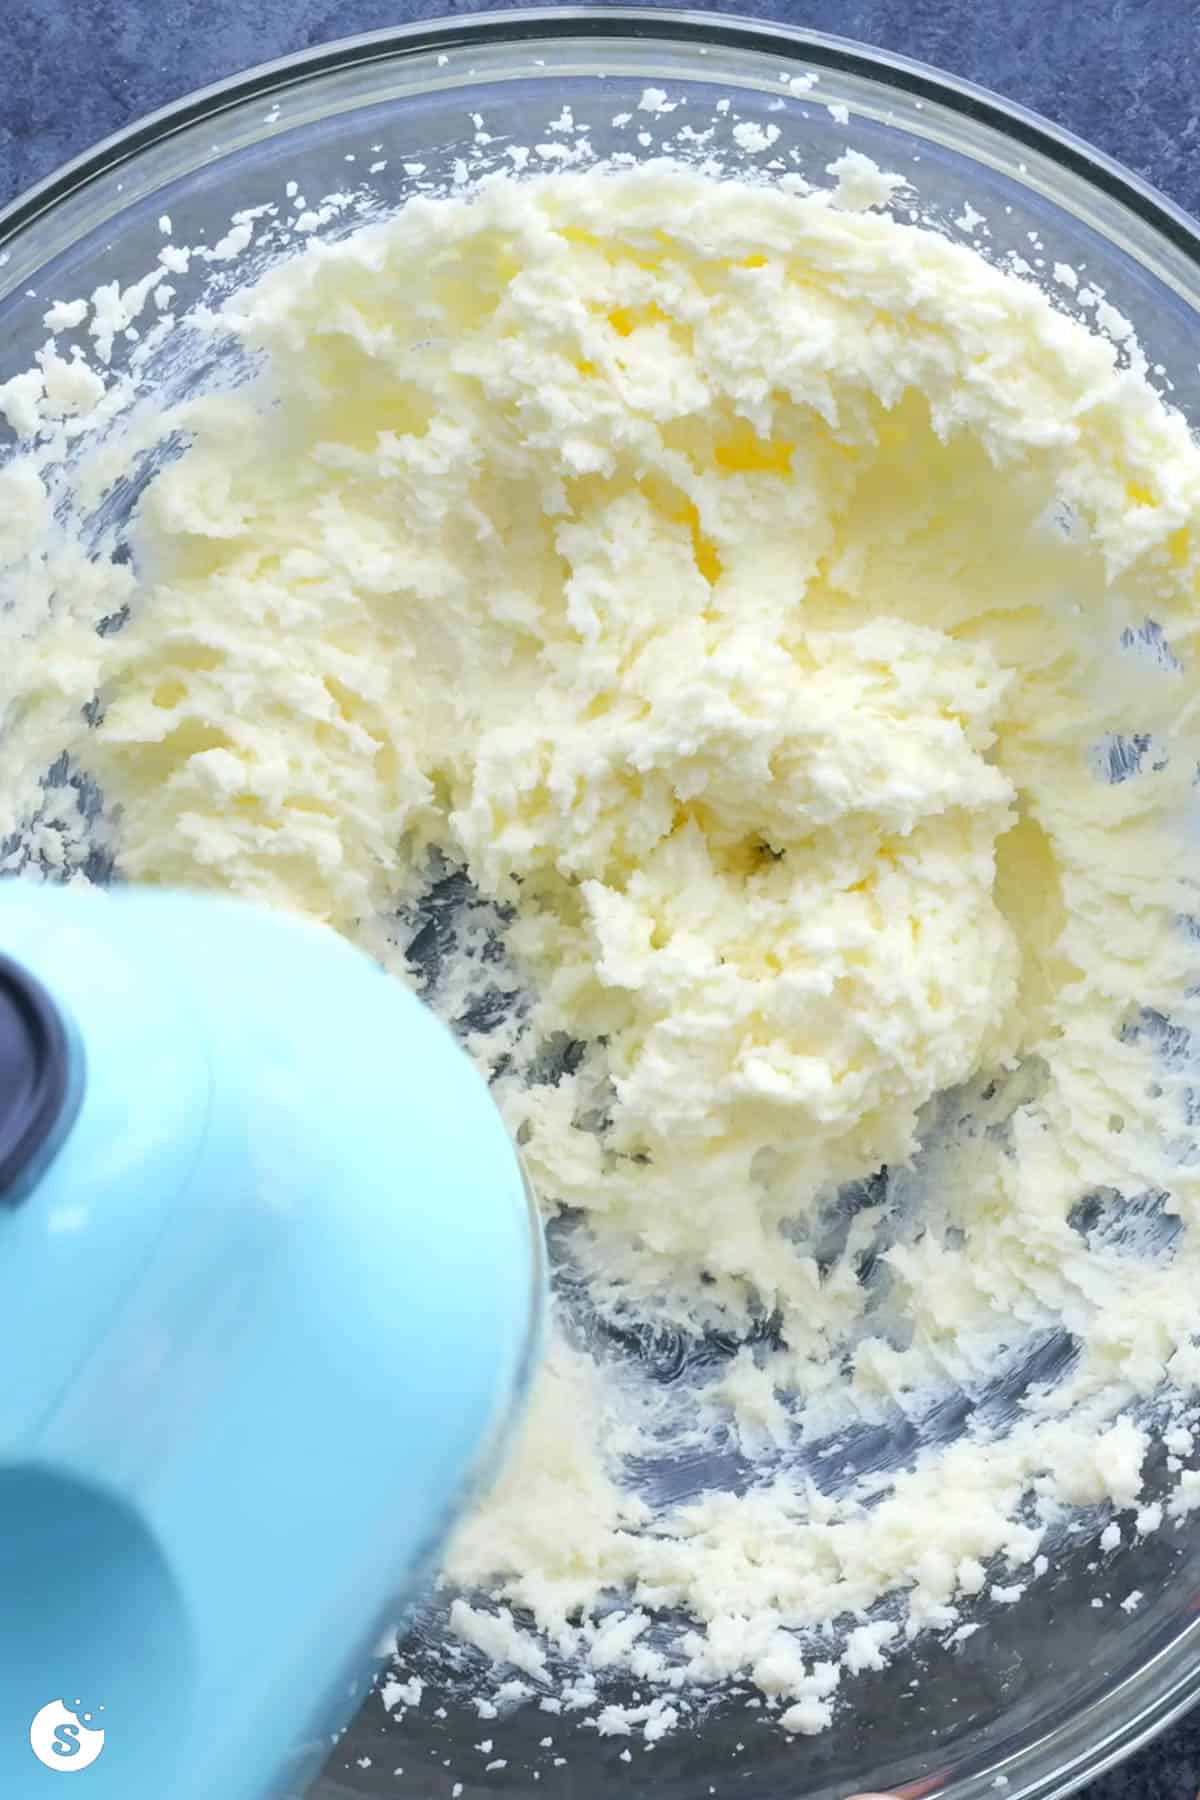 Creamed butter in a clear glass bowl